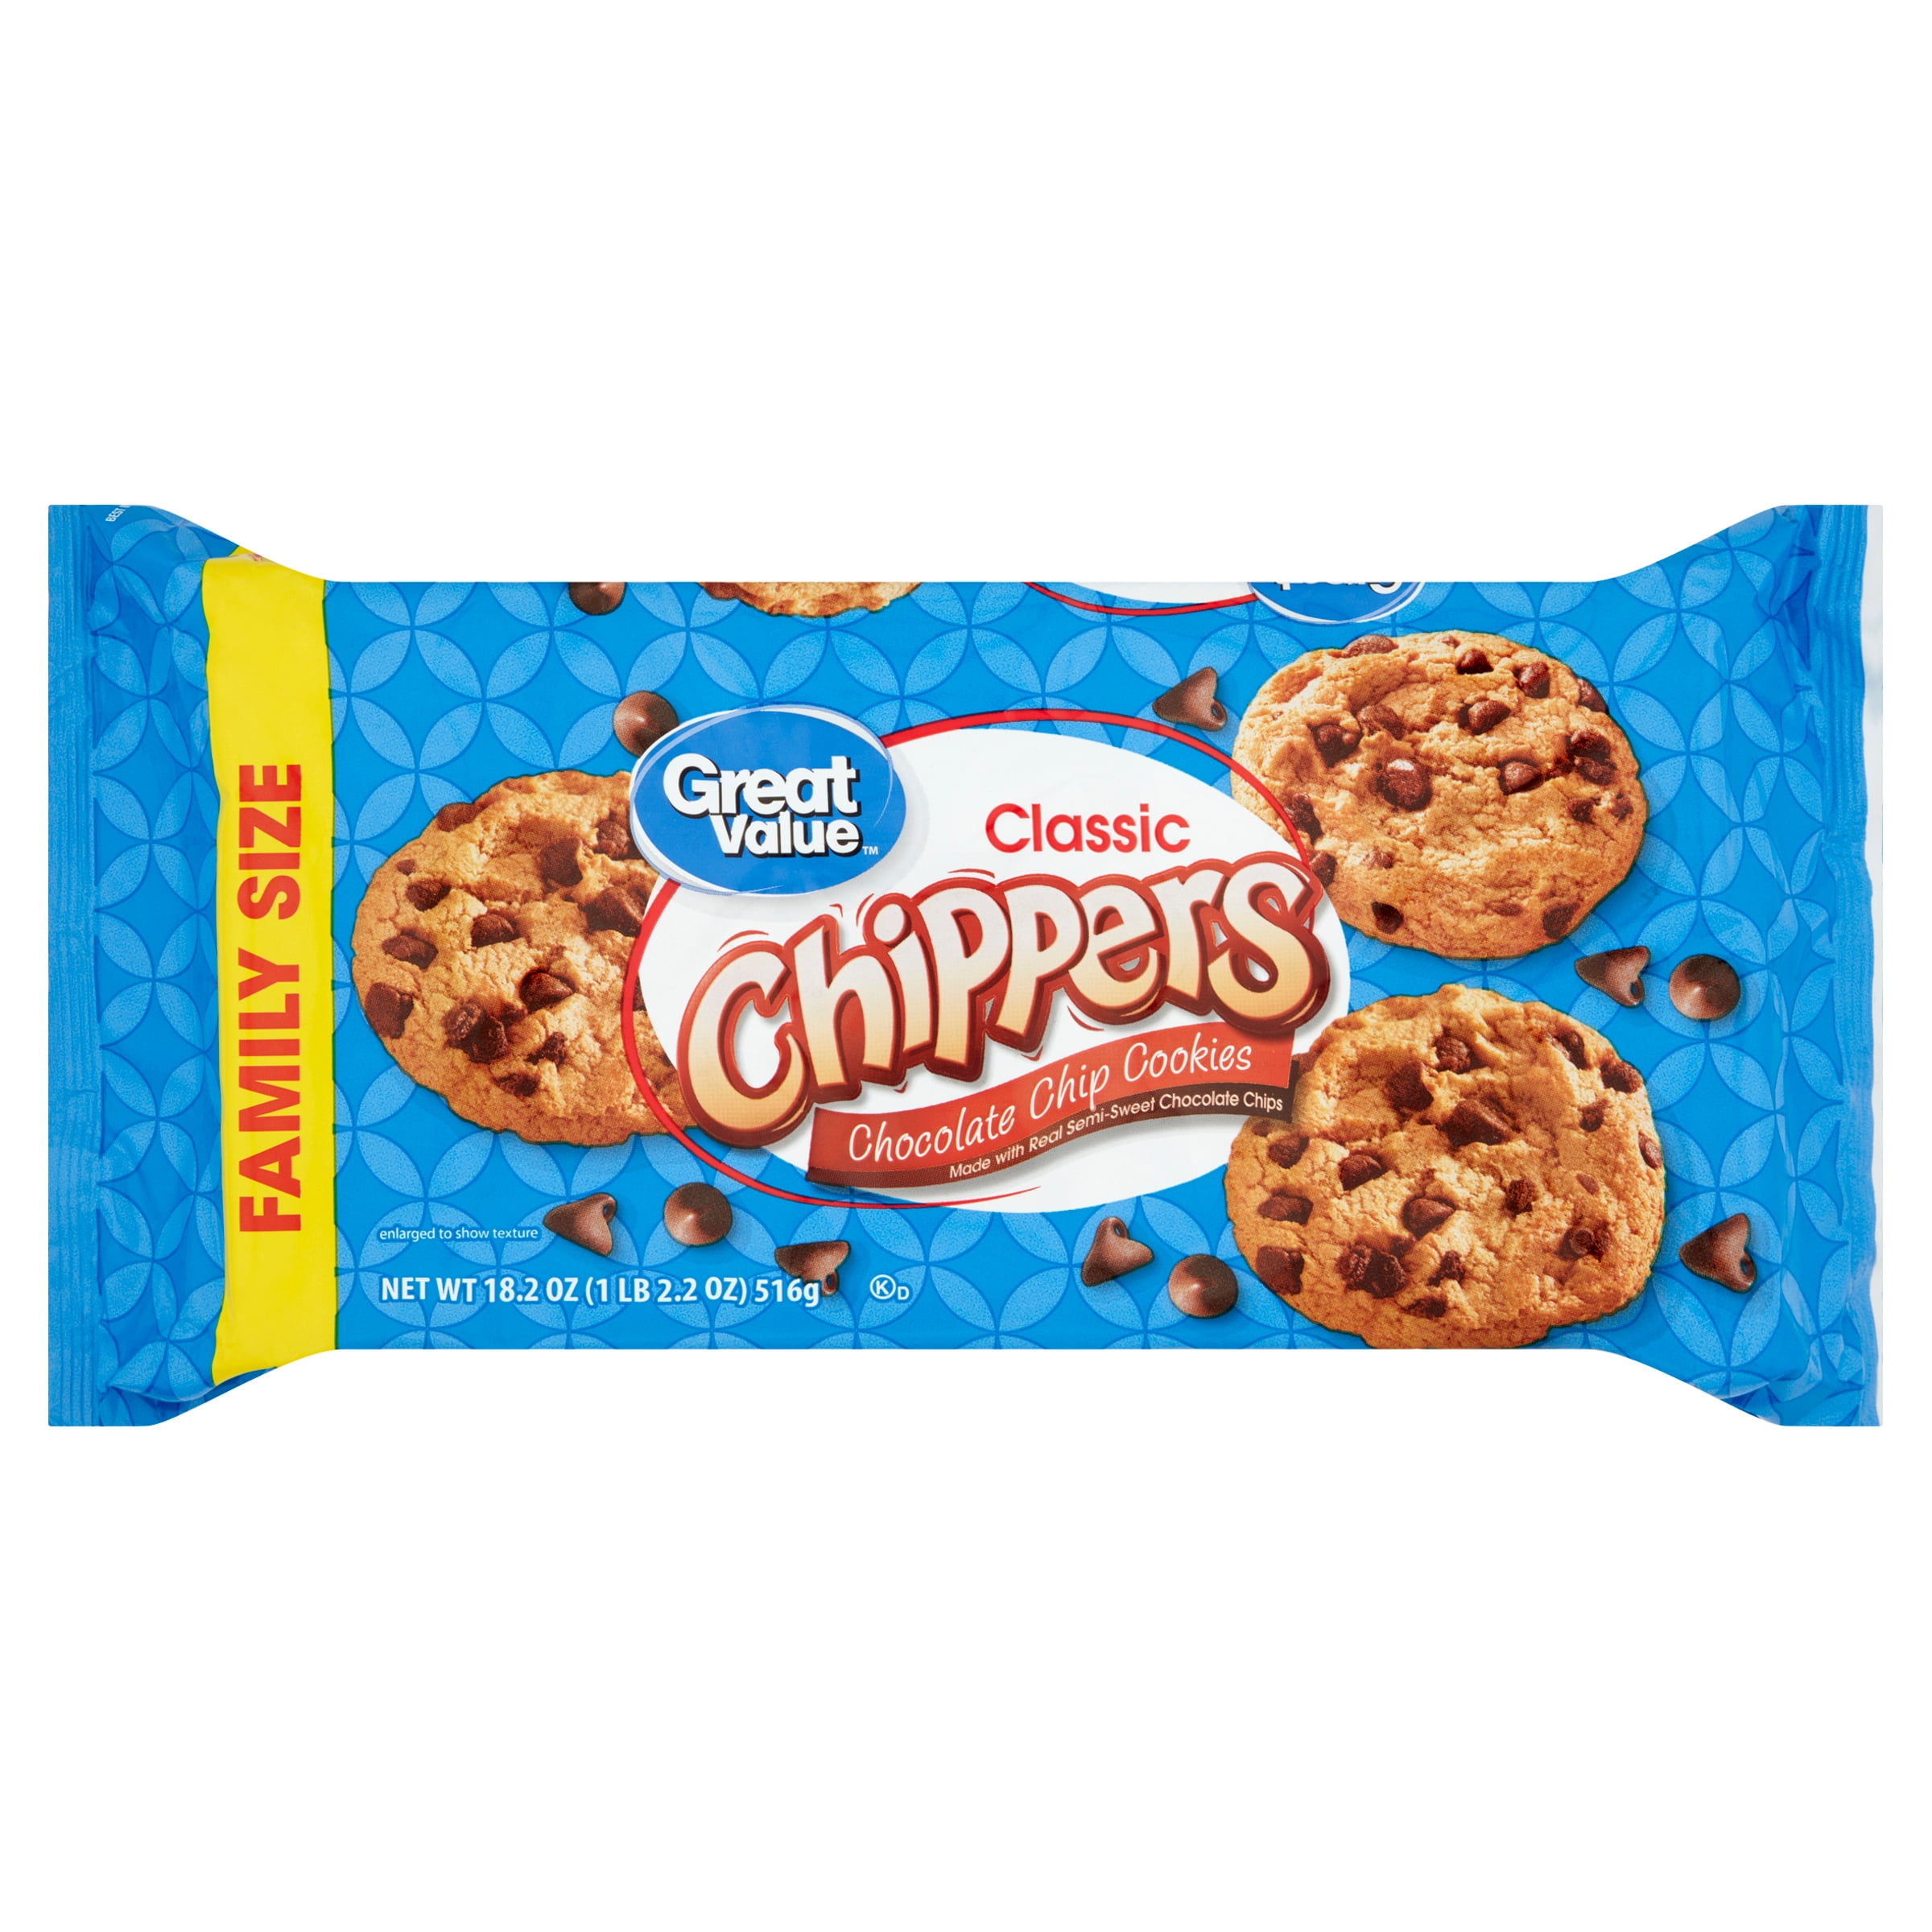 Great Value Classic Chocolate Chip Cookies, Family Size, 18.2 oz